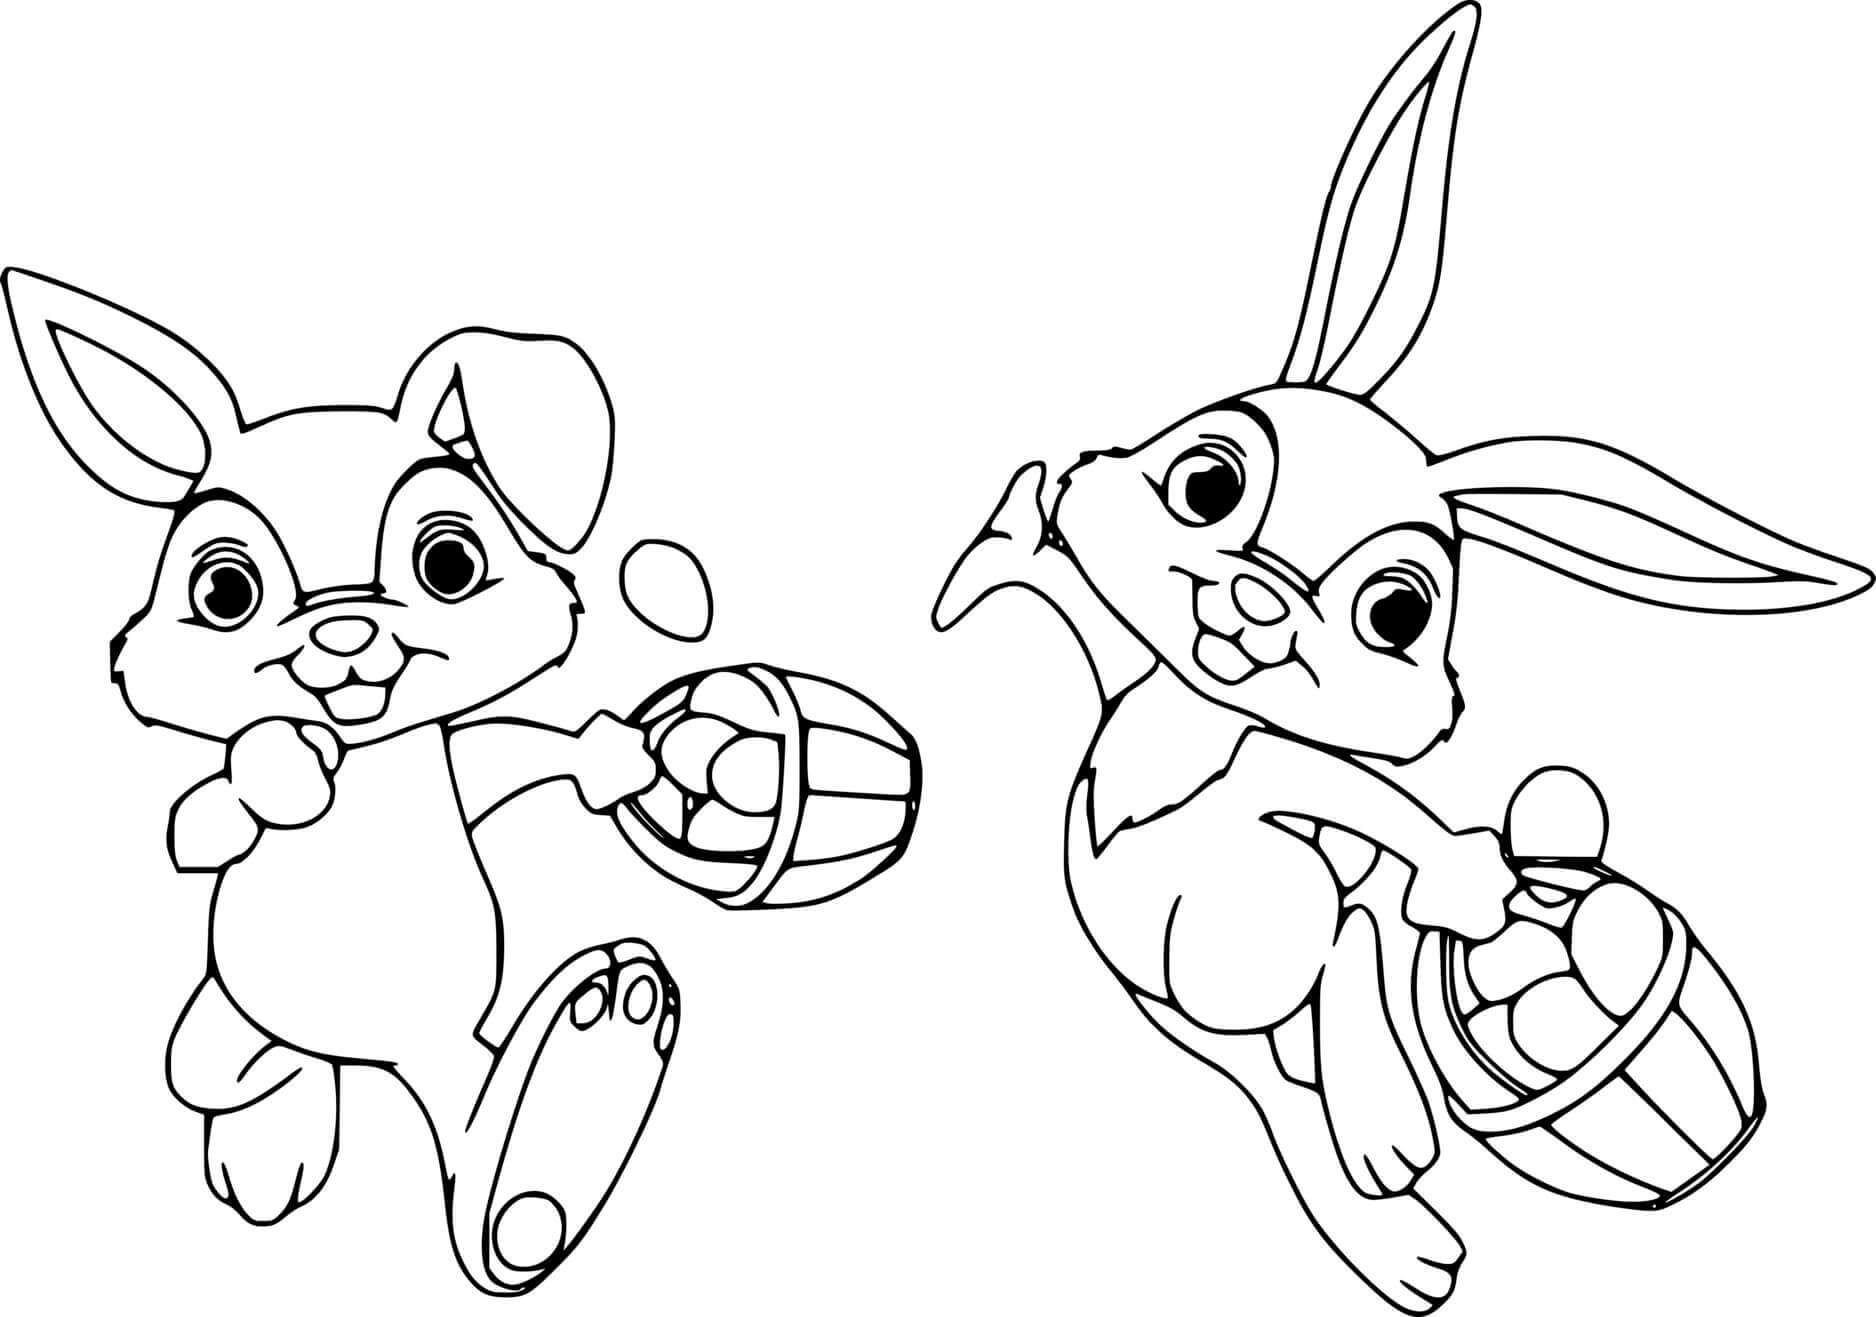 Two Running Easter Bunnies